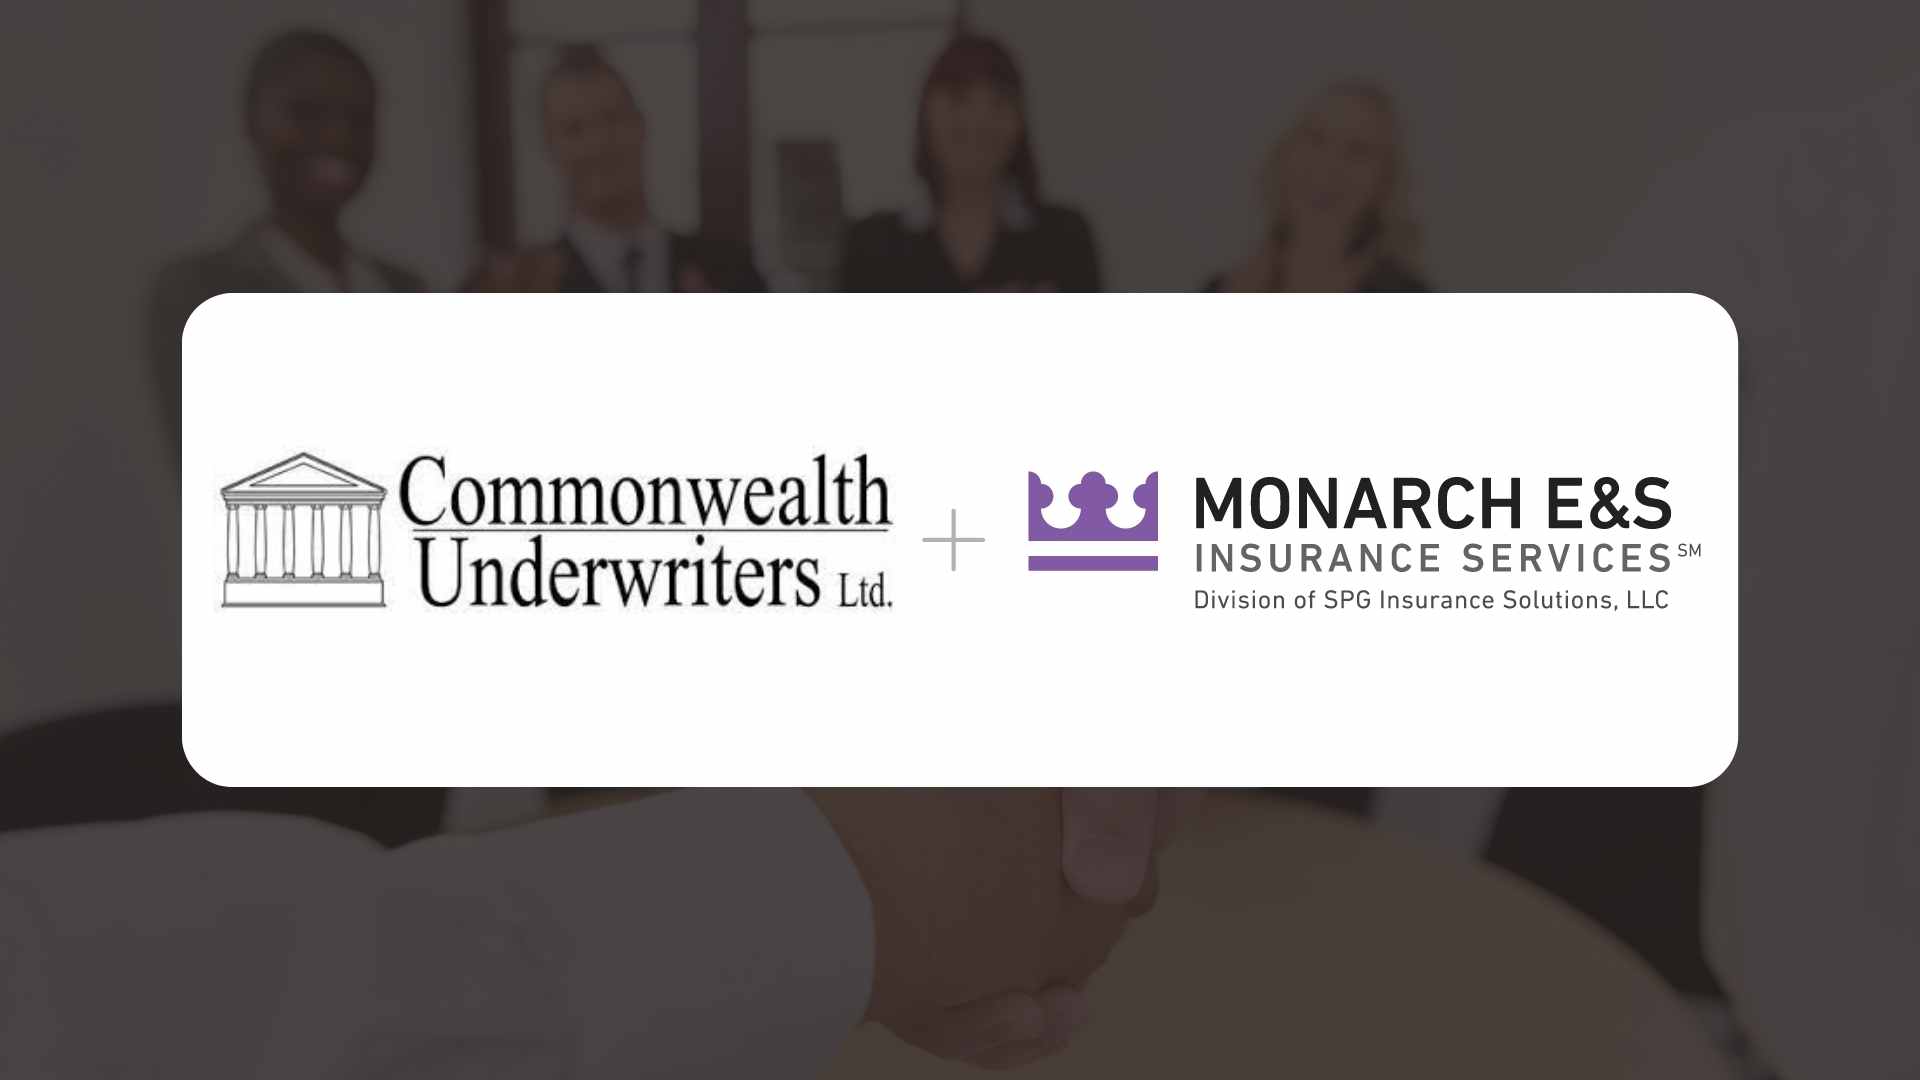 Monarch ES acquires assets of Commonwealth Underwriters